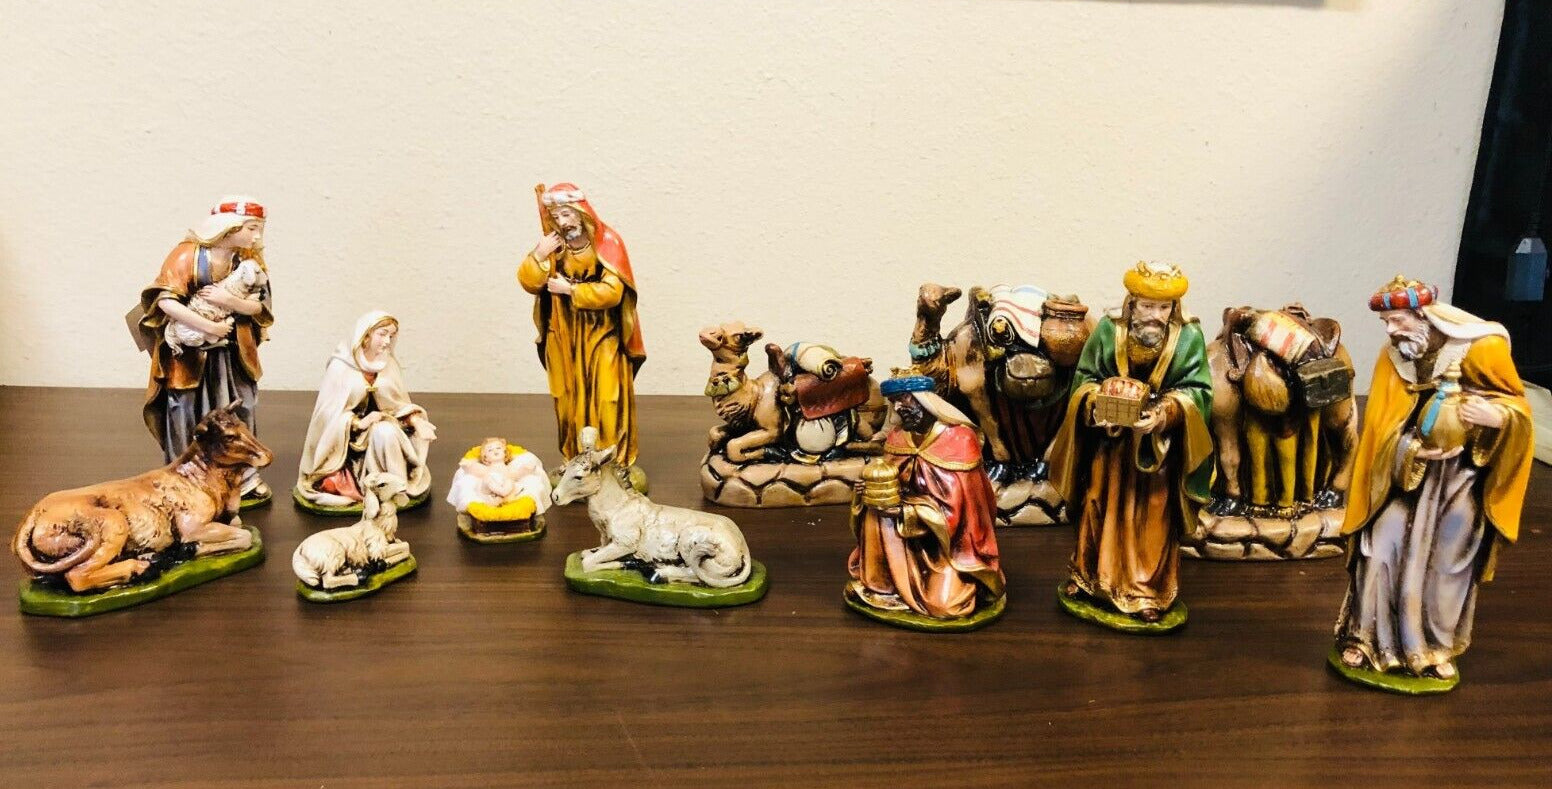 13 piece Nativity Scene, New from Colombia